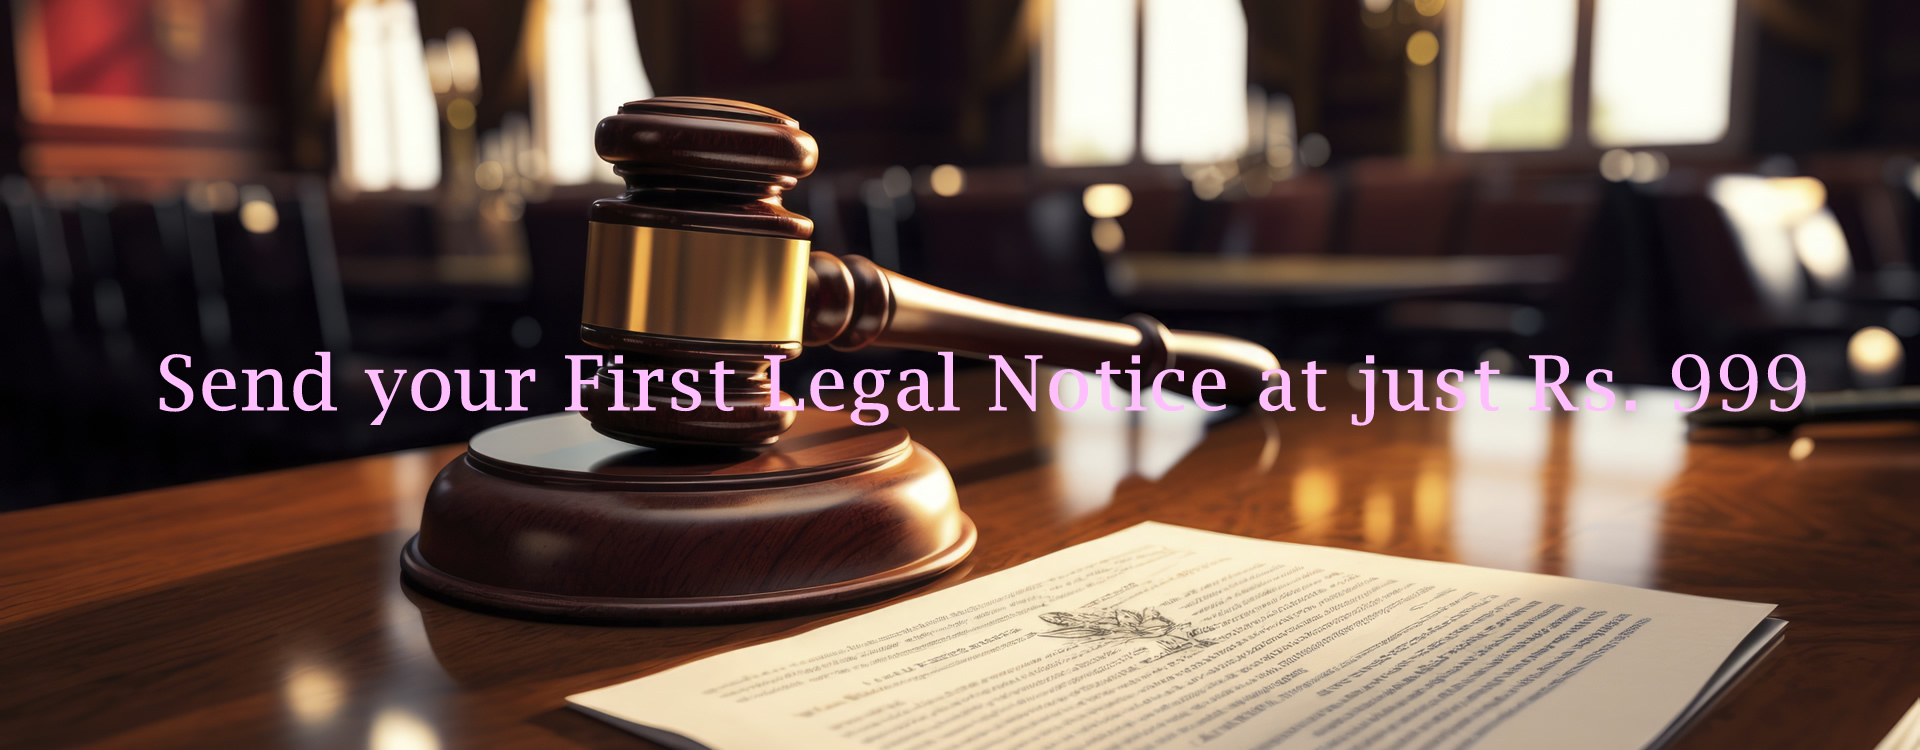 Send your First Legal Notice at just Rs. 999